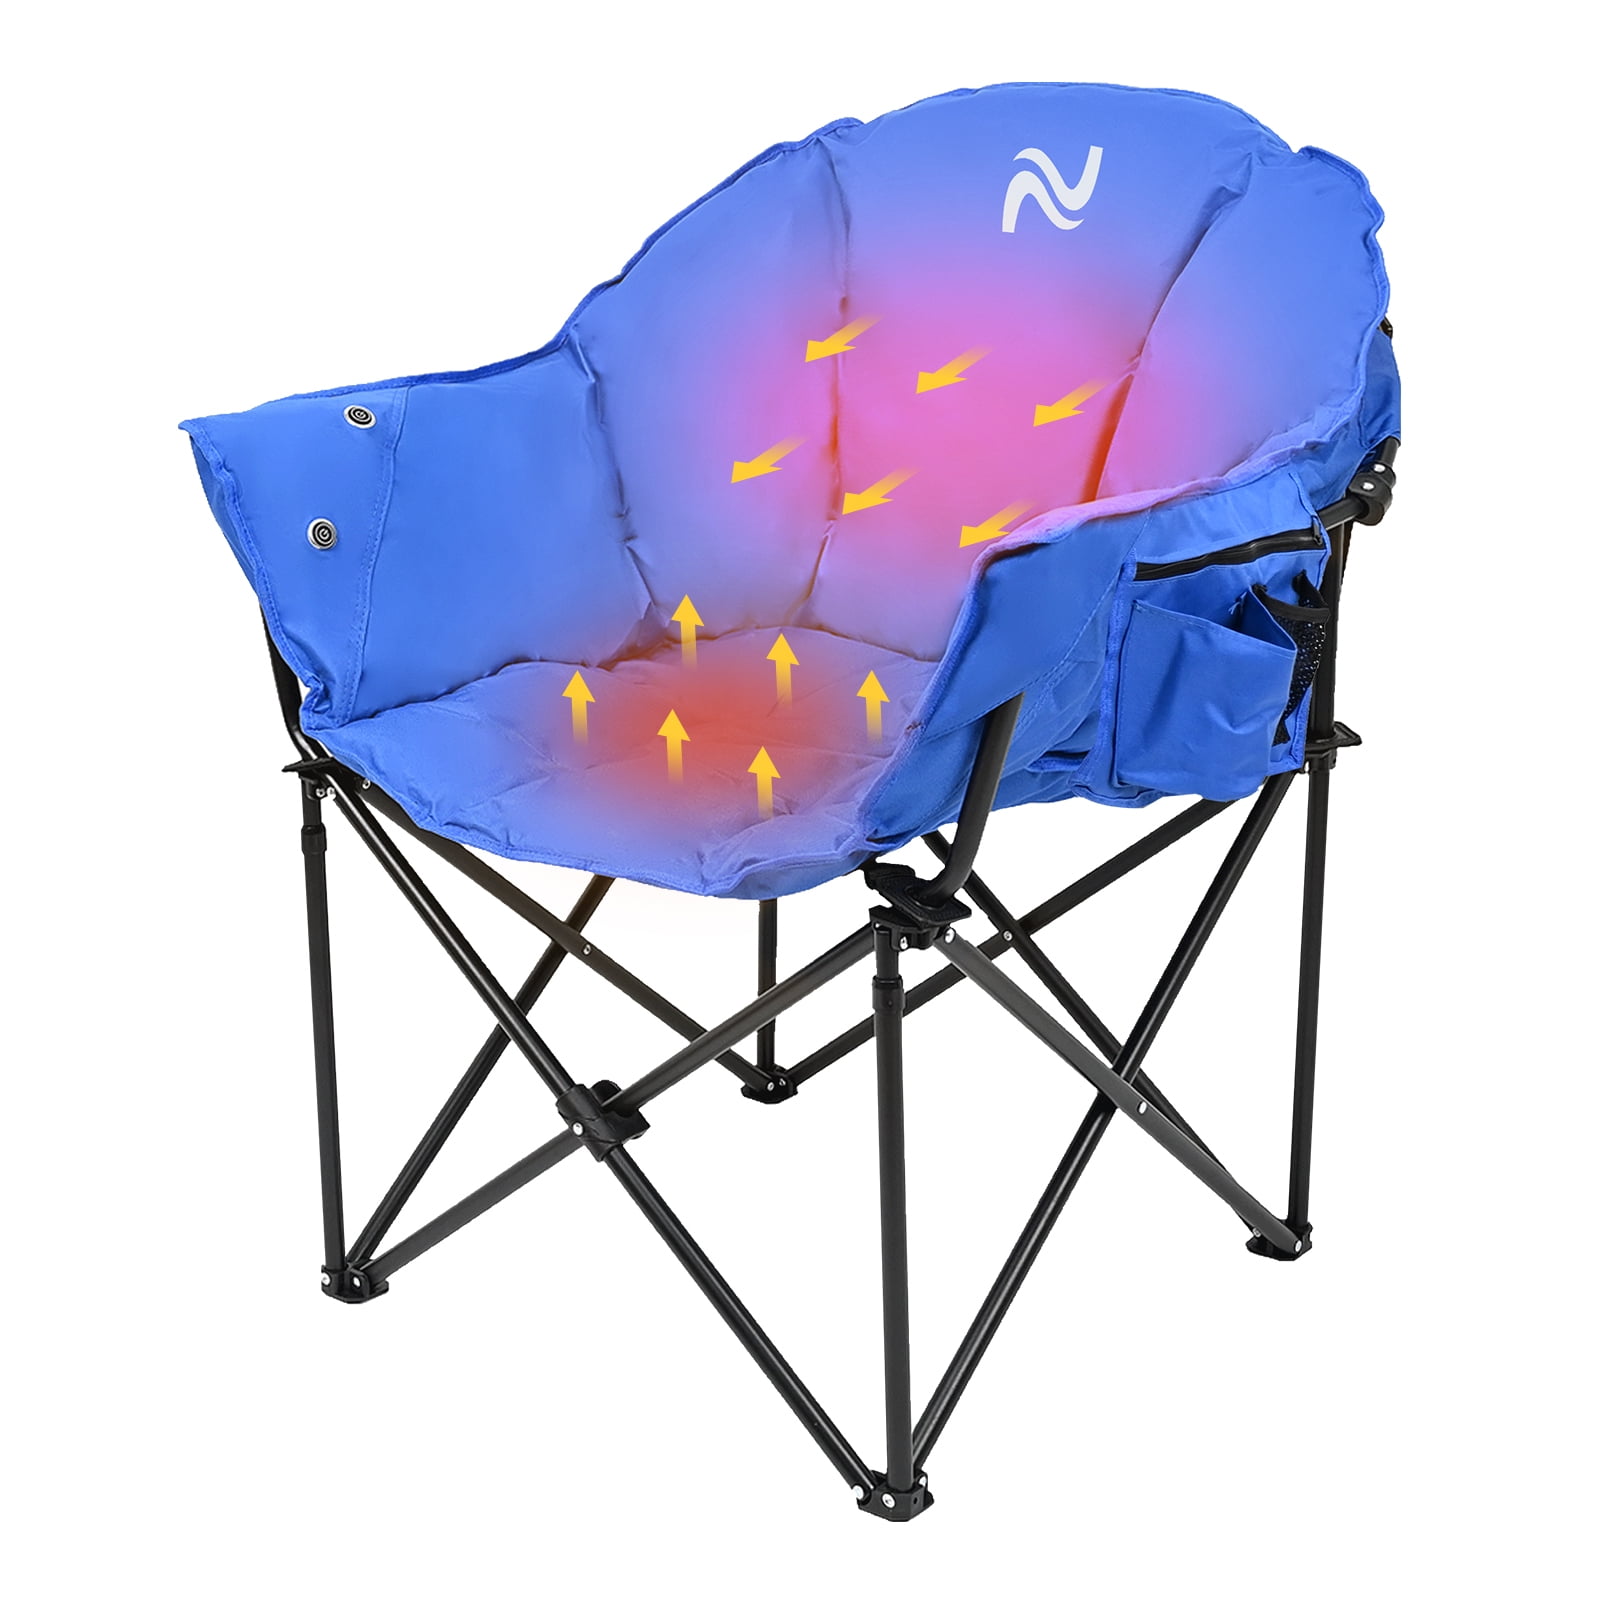 NAIZEA Oversized Heated Camping Chair, Portable Extra Wide Outdoor Folding  Sports Chairs, Lawn Chair Beach Chair with Cup Holder, Storage Bag, 2Pack